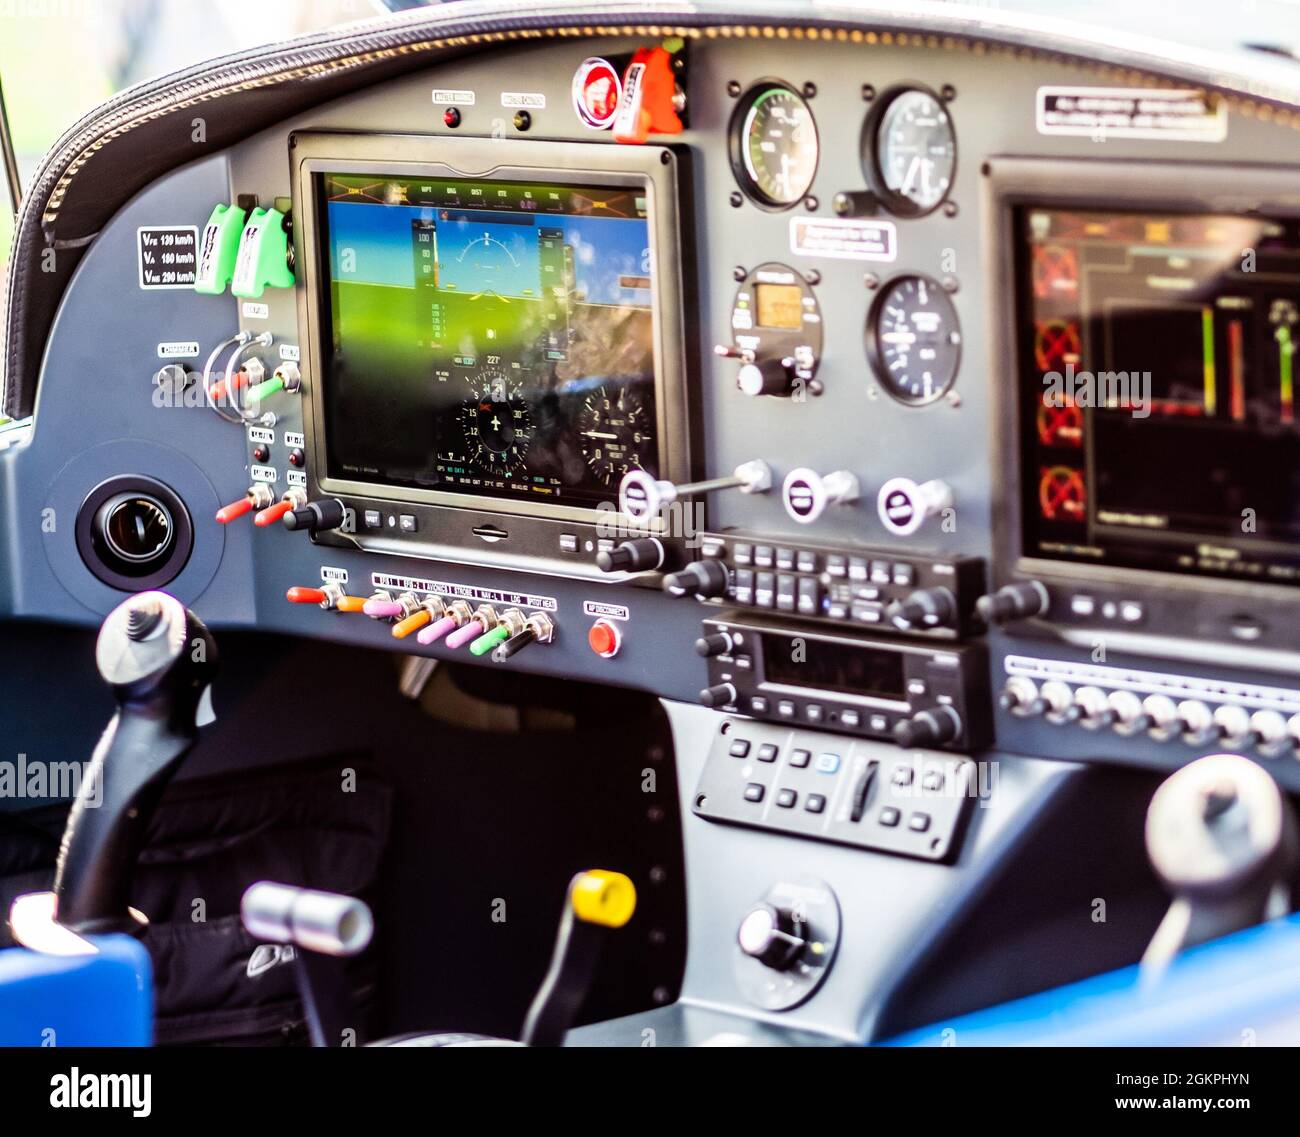 Control pannel of plane Stock Photo